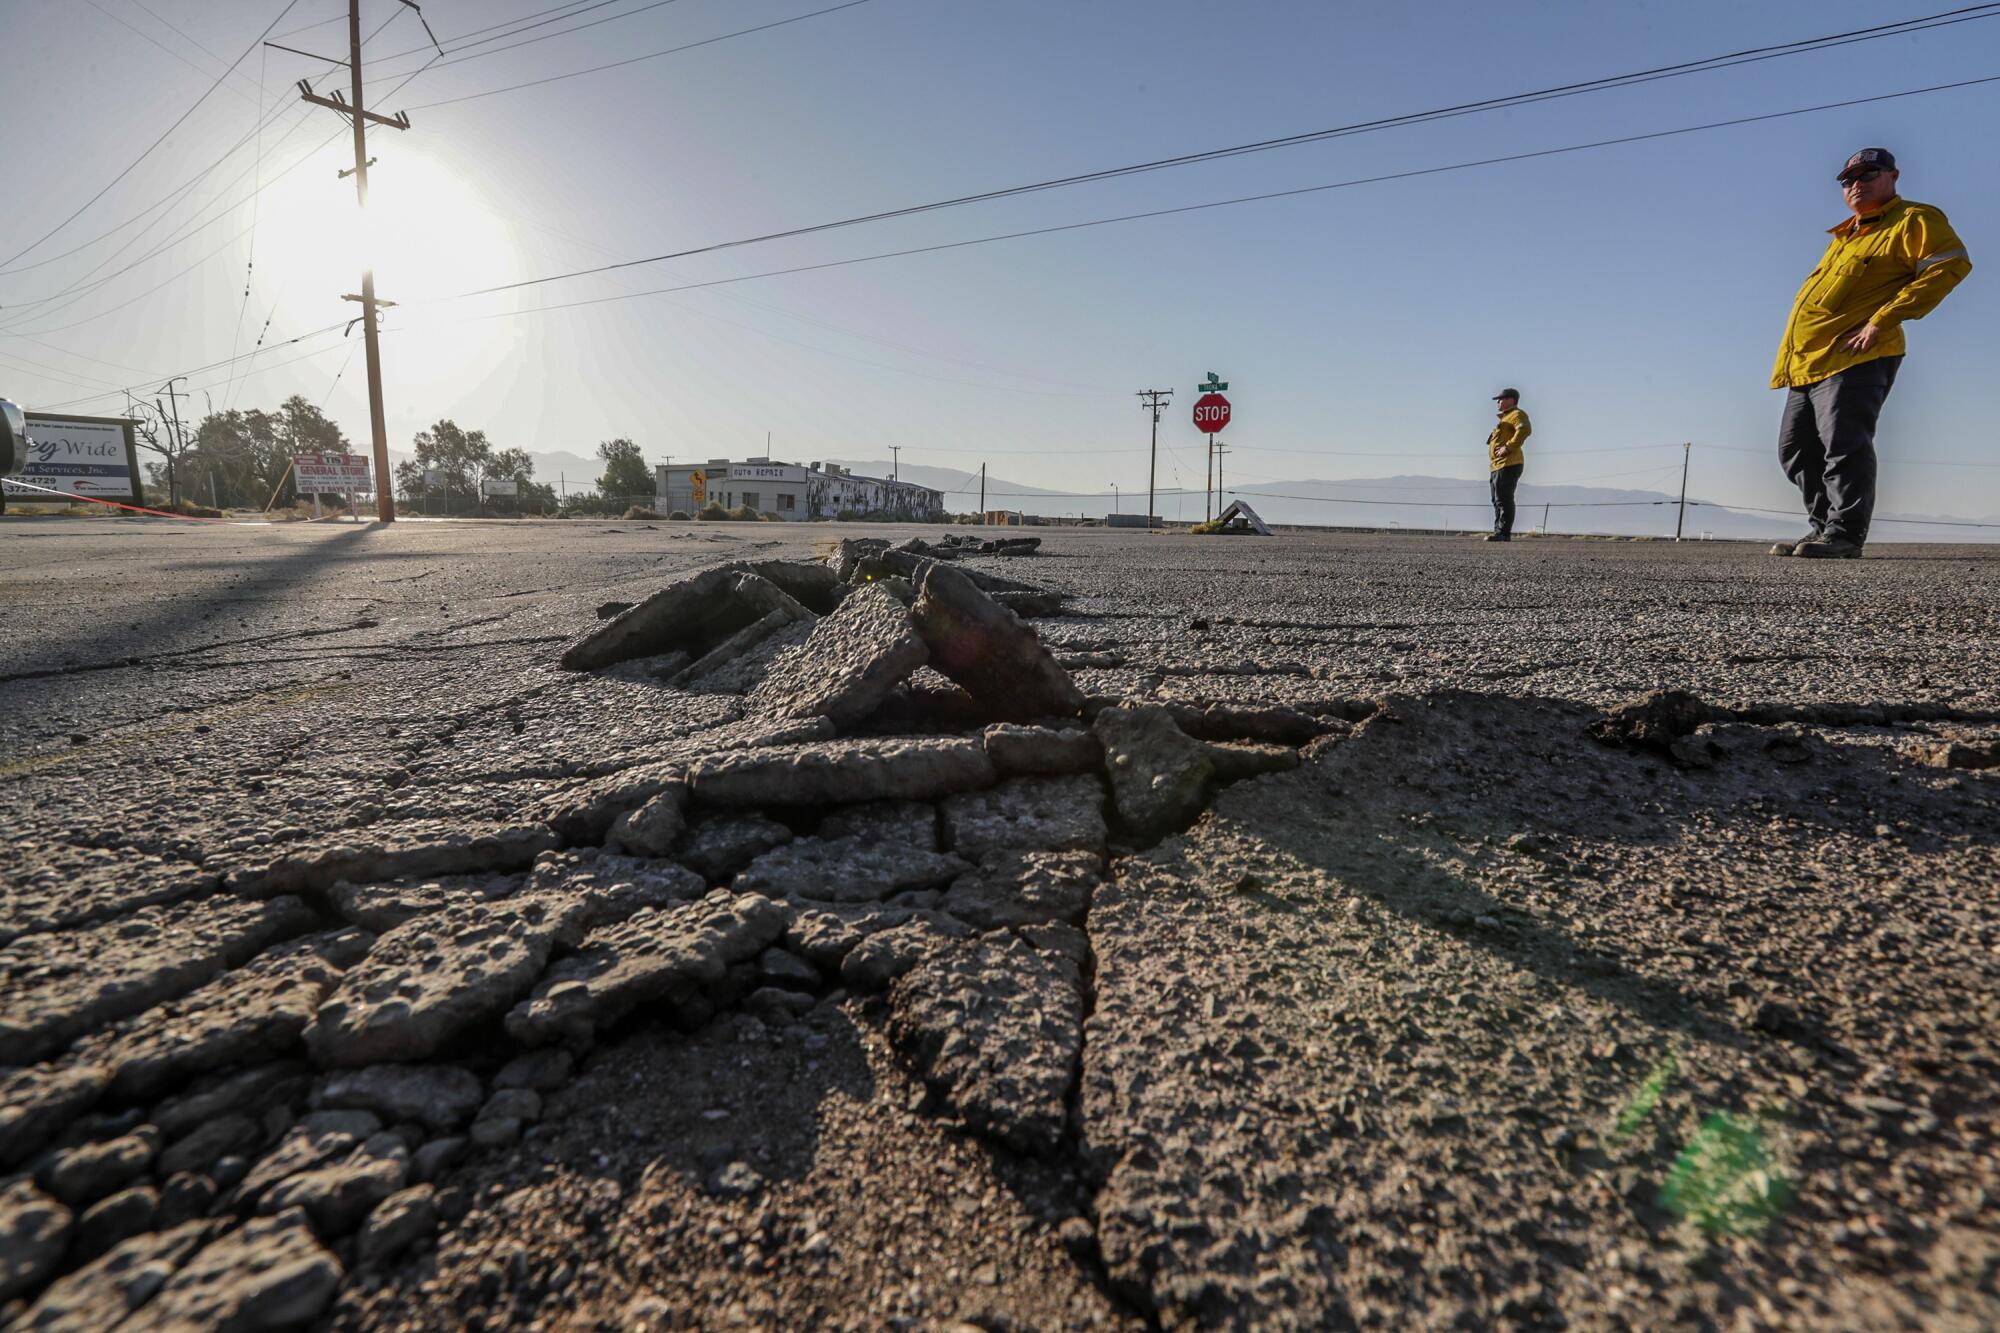 Buckled asphalt courses through a parking lot in Argus, which experienced two major earthquakes in July. The Ridgecrest quakes were the largest in Southern California in two decades.